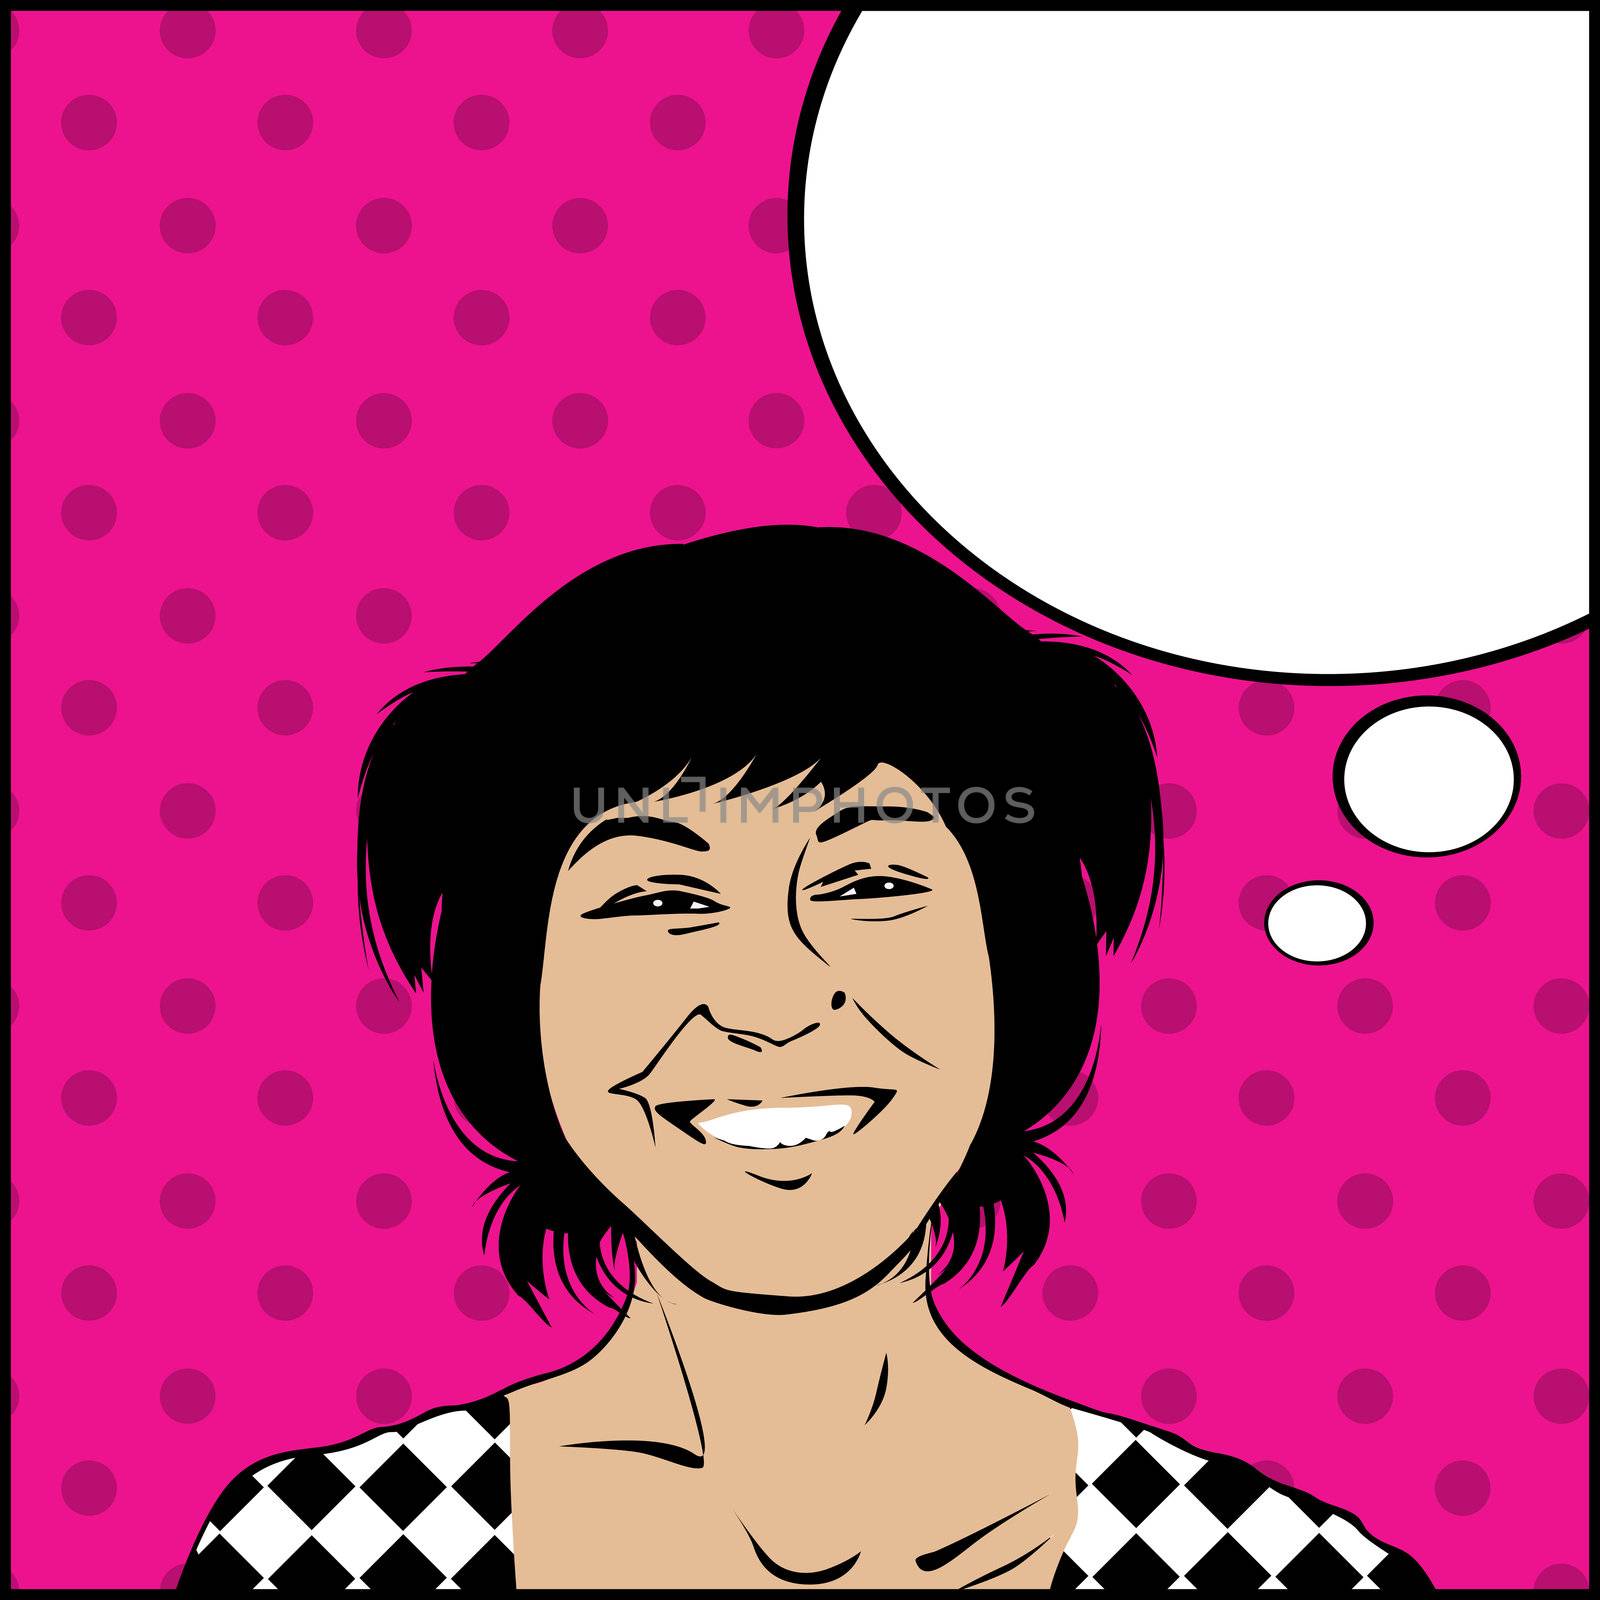 Image shows a comic style graphic of a very happy girl and a speech bubble for your text